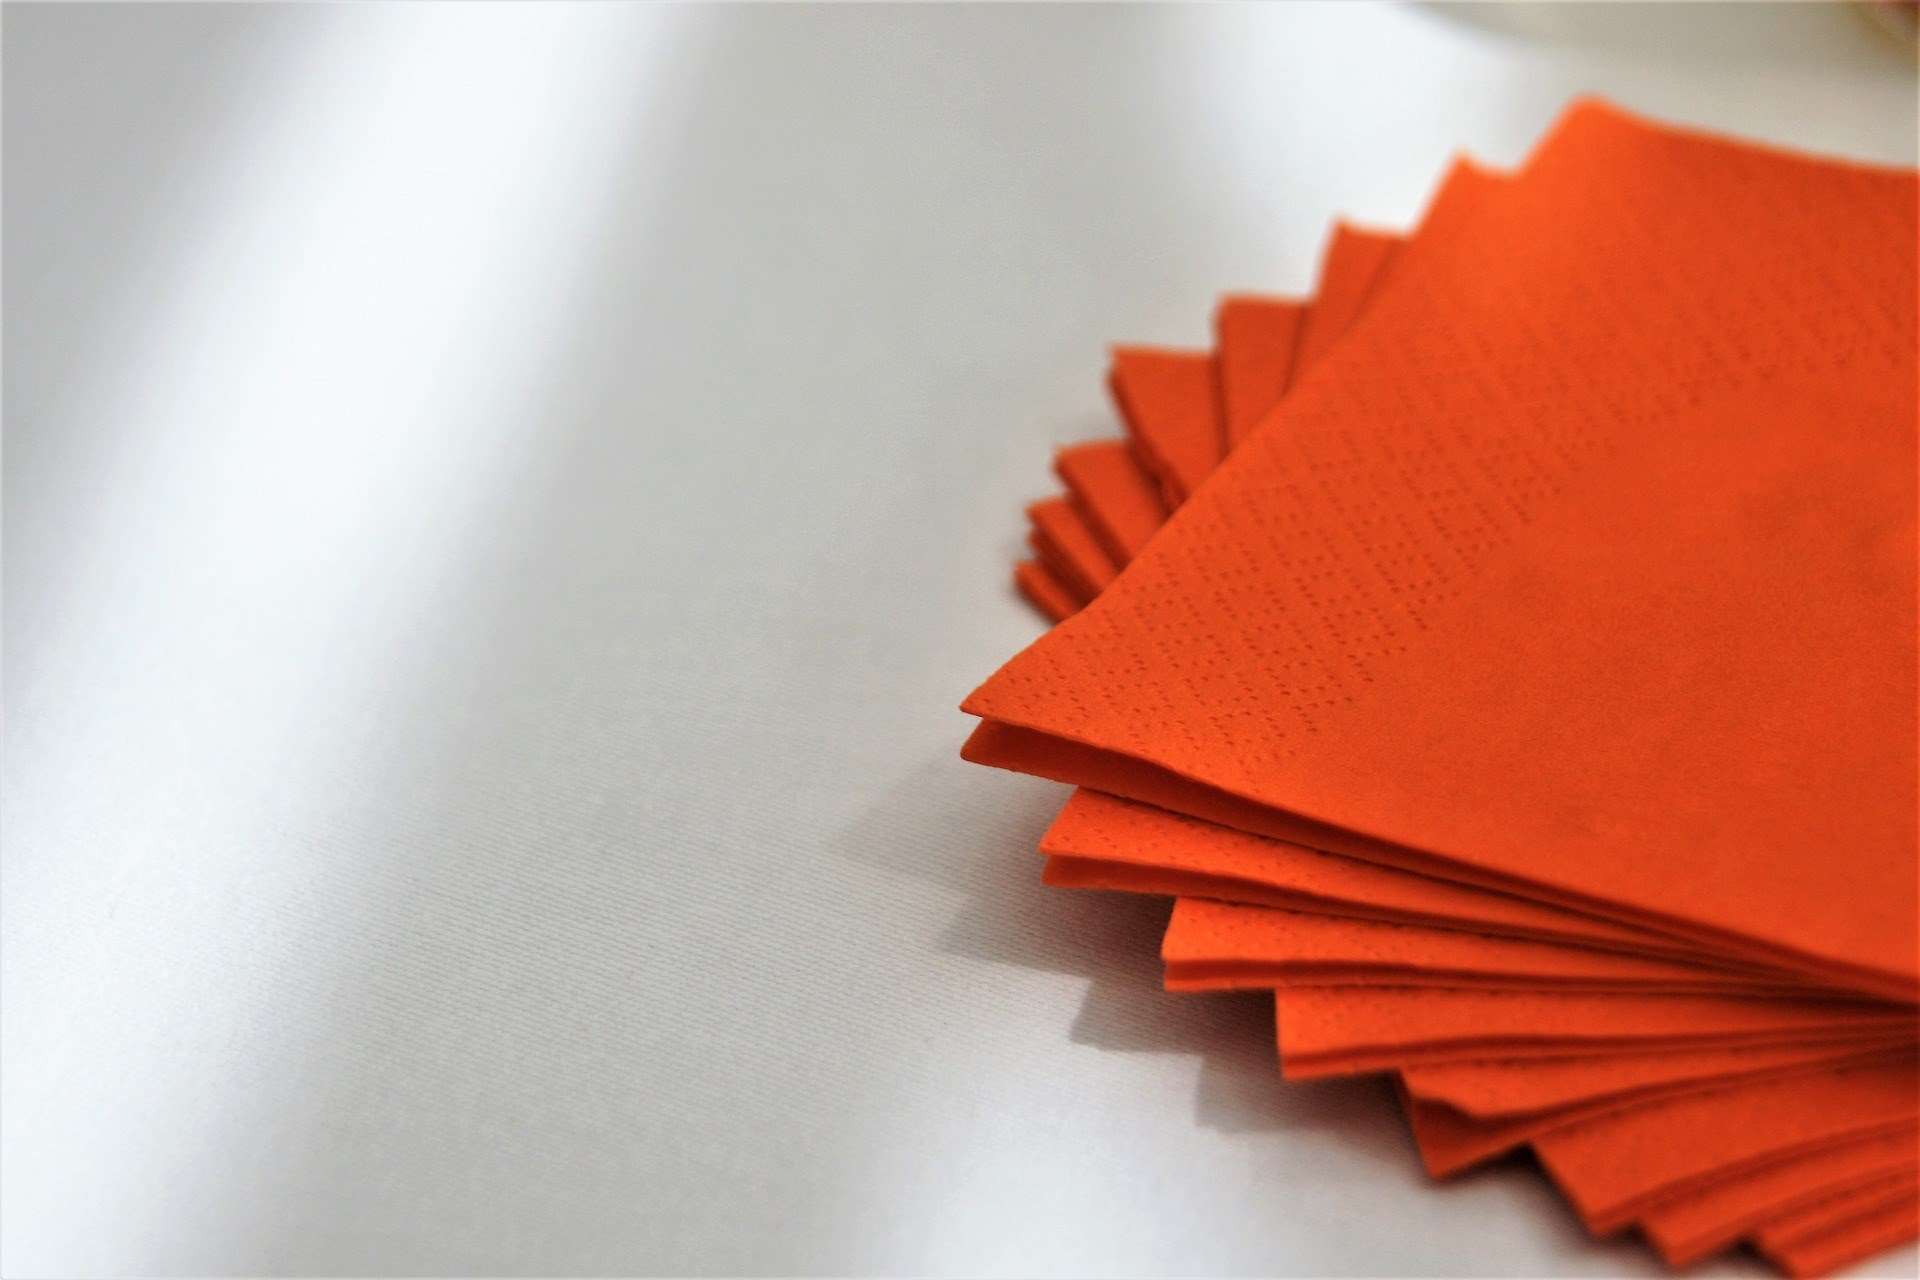 Swan Mill makes paper products like napkins and Christmas crackers